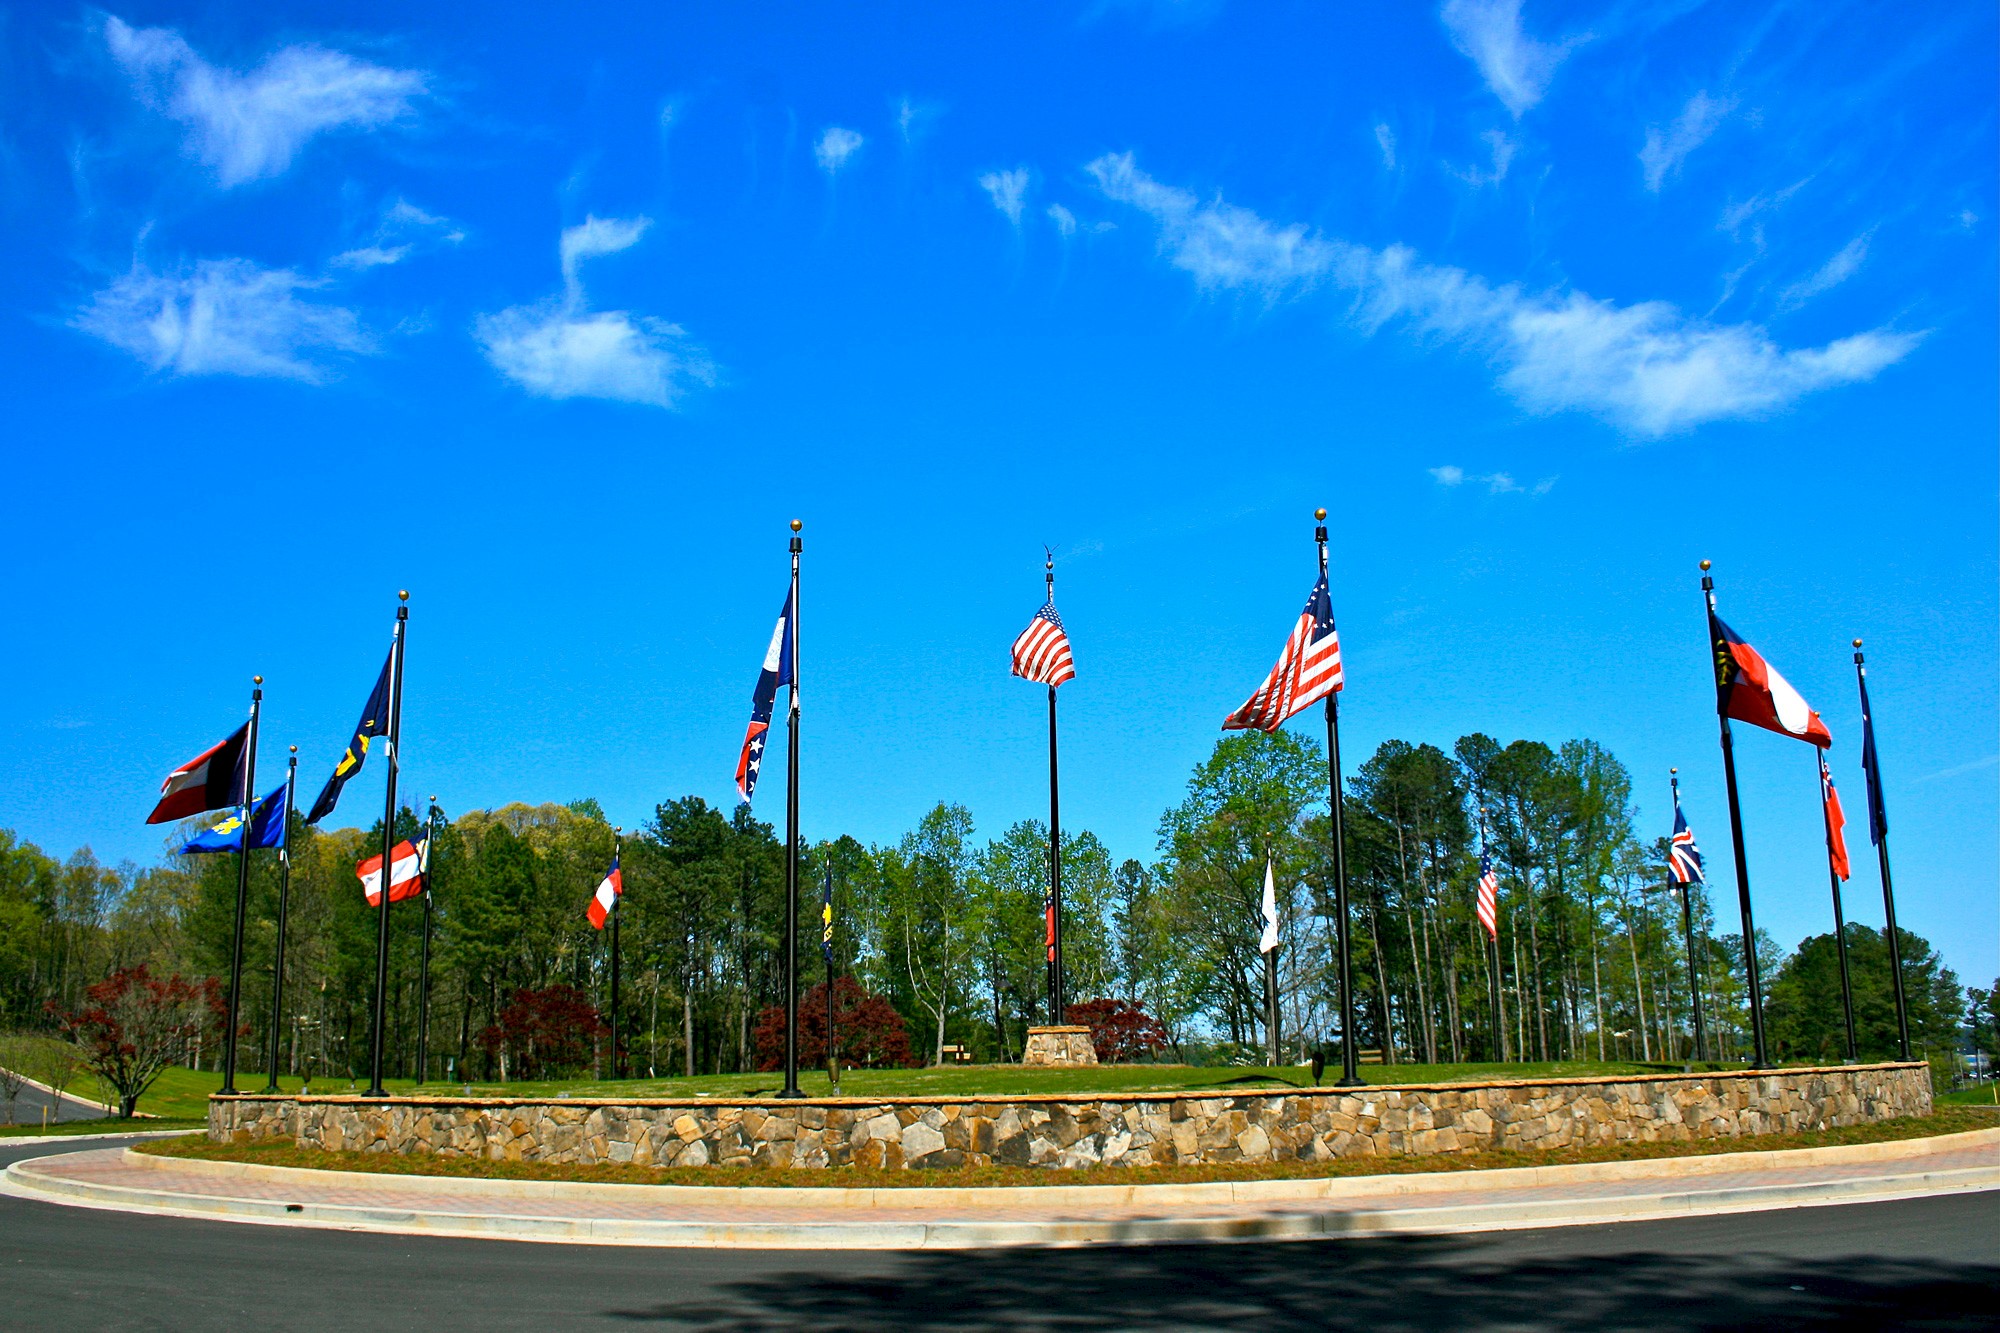 A roundabout with multiple flagpoles displaying various national and state flags set against a bright blue sky with scattered clouds.